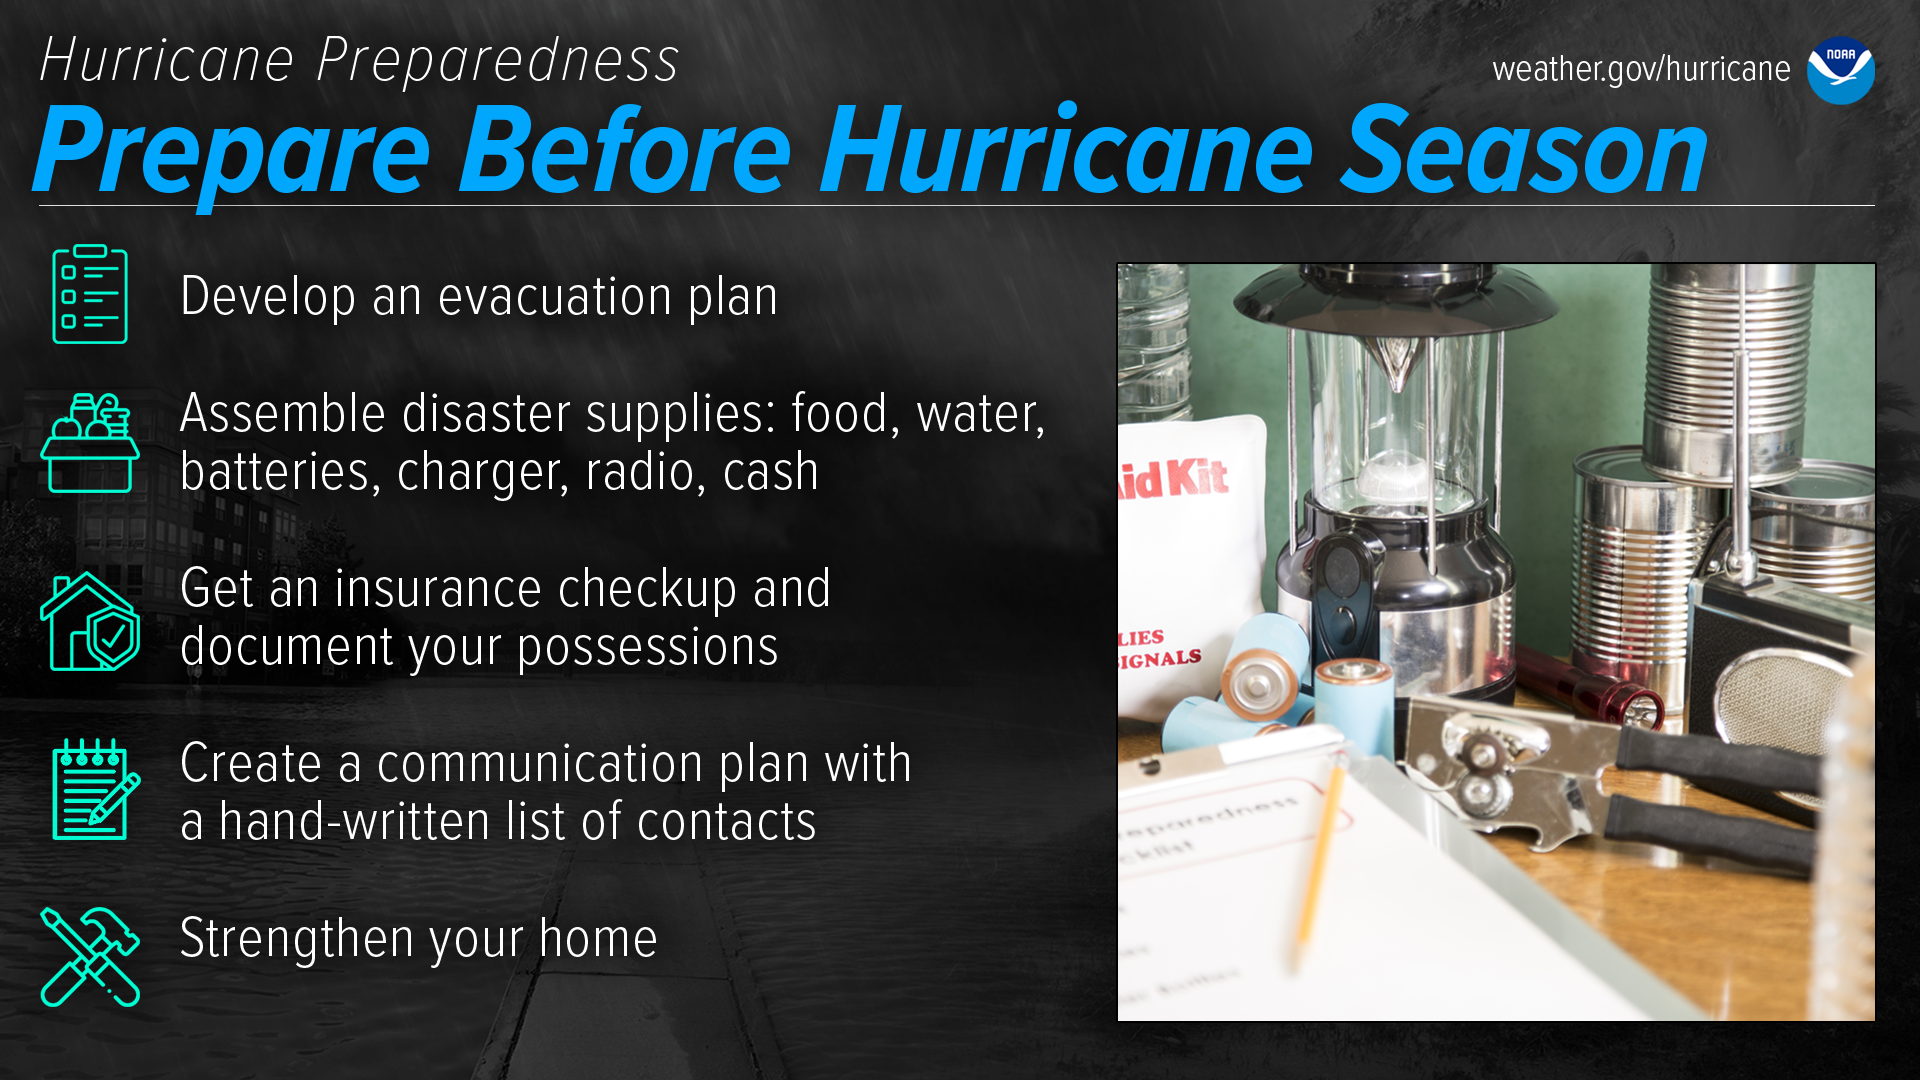 Hurricane Preparedness: Prepare before hurricane season. Develop an evacuation plan. Assemble disaster supplies: food, water, batteries, charger, radio cash. Get an insurance checkup and document your possessions. Create a communication plan with a hand-written list of contacts. Strengthen your home.